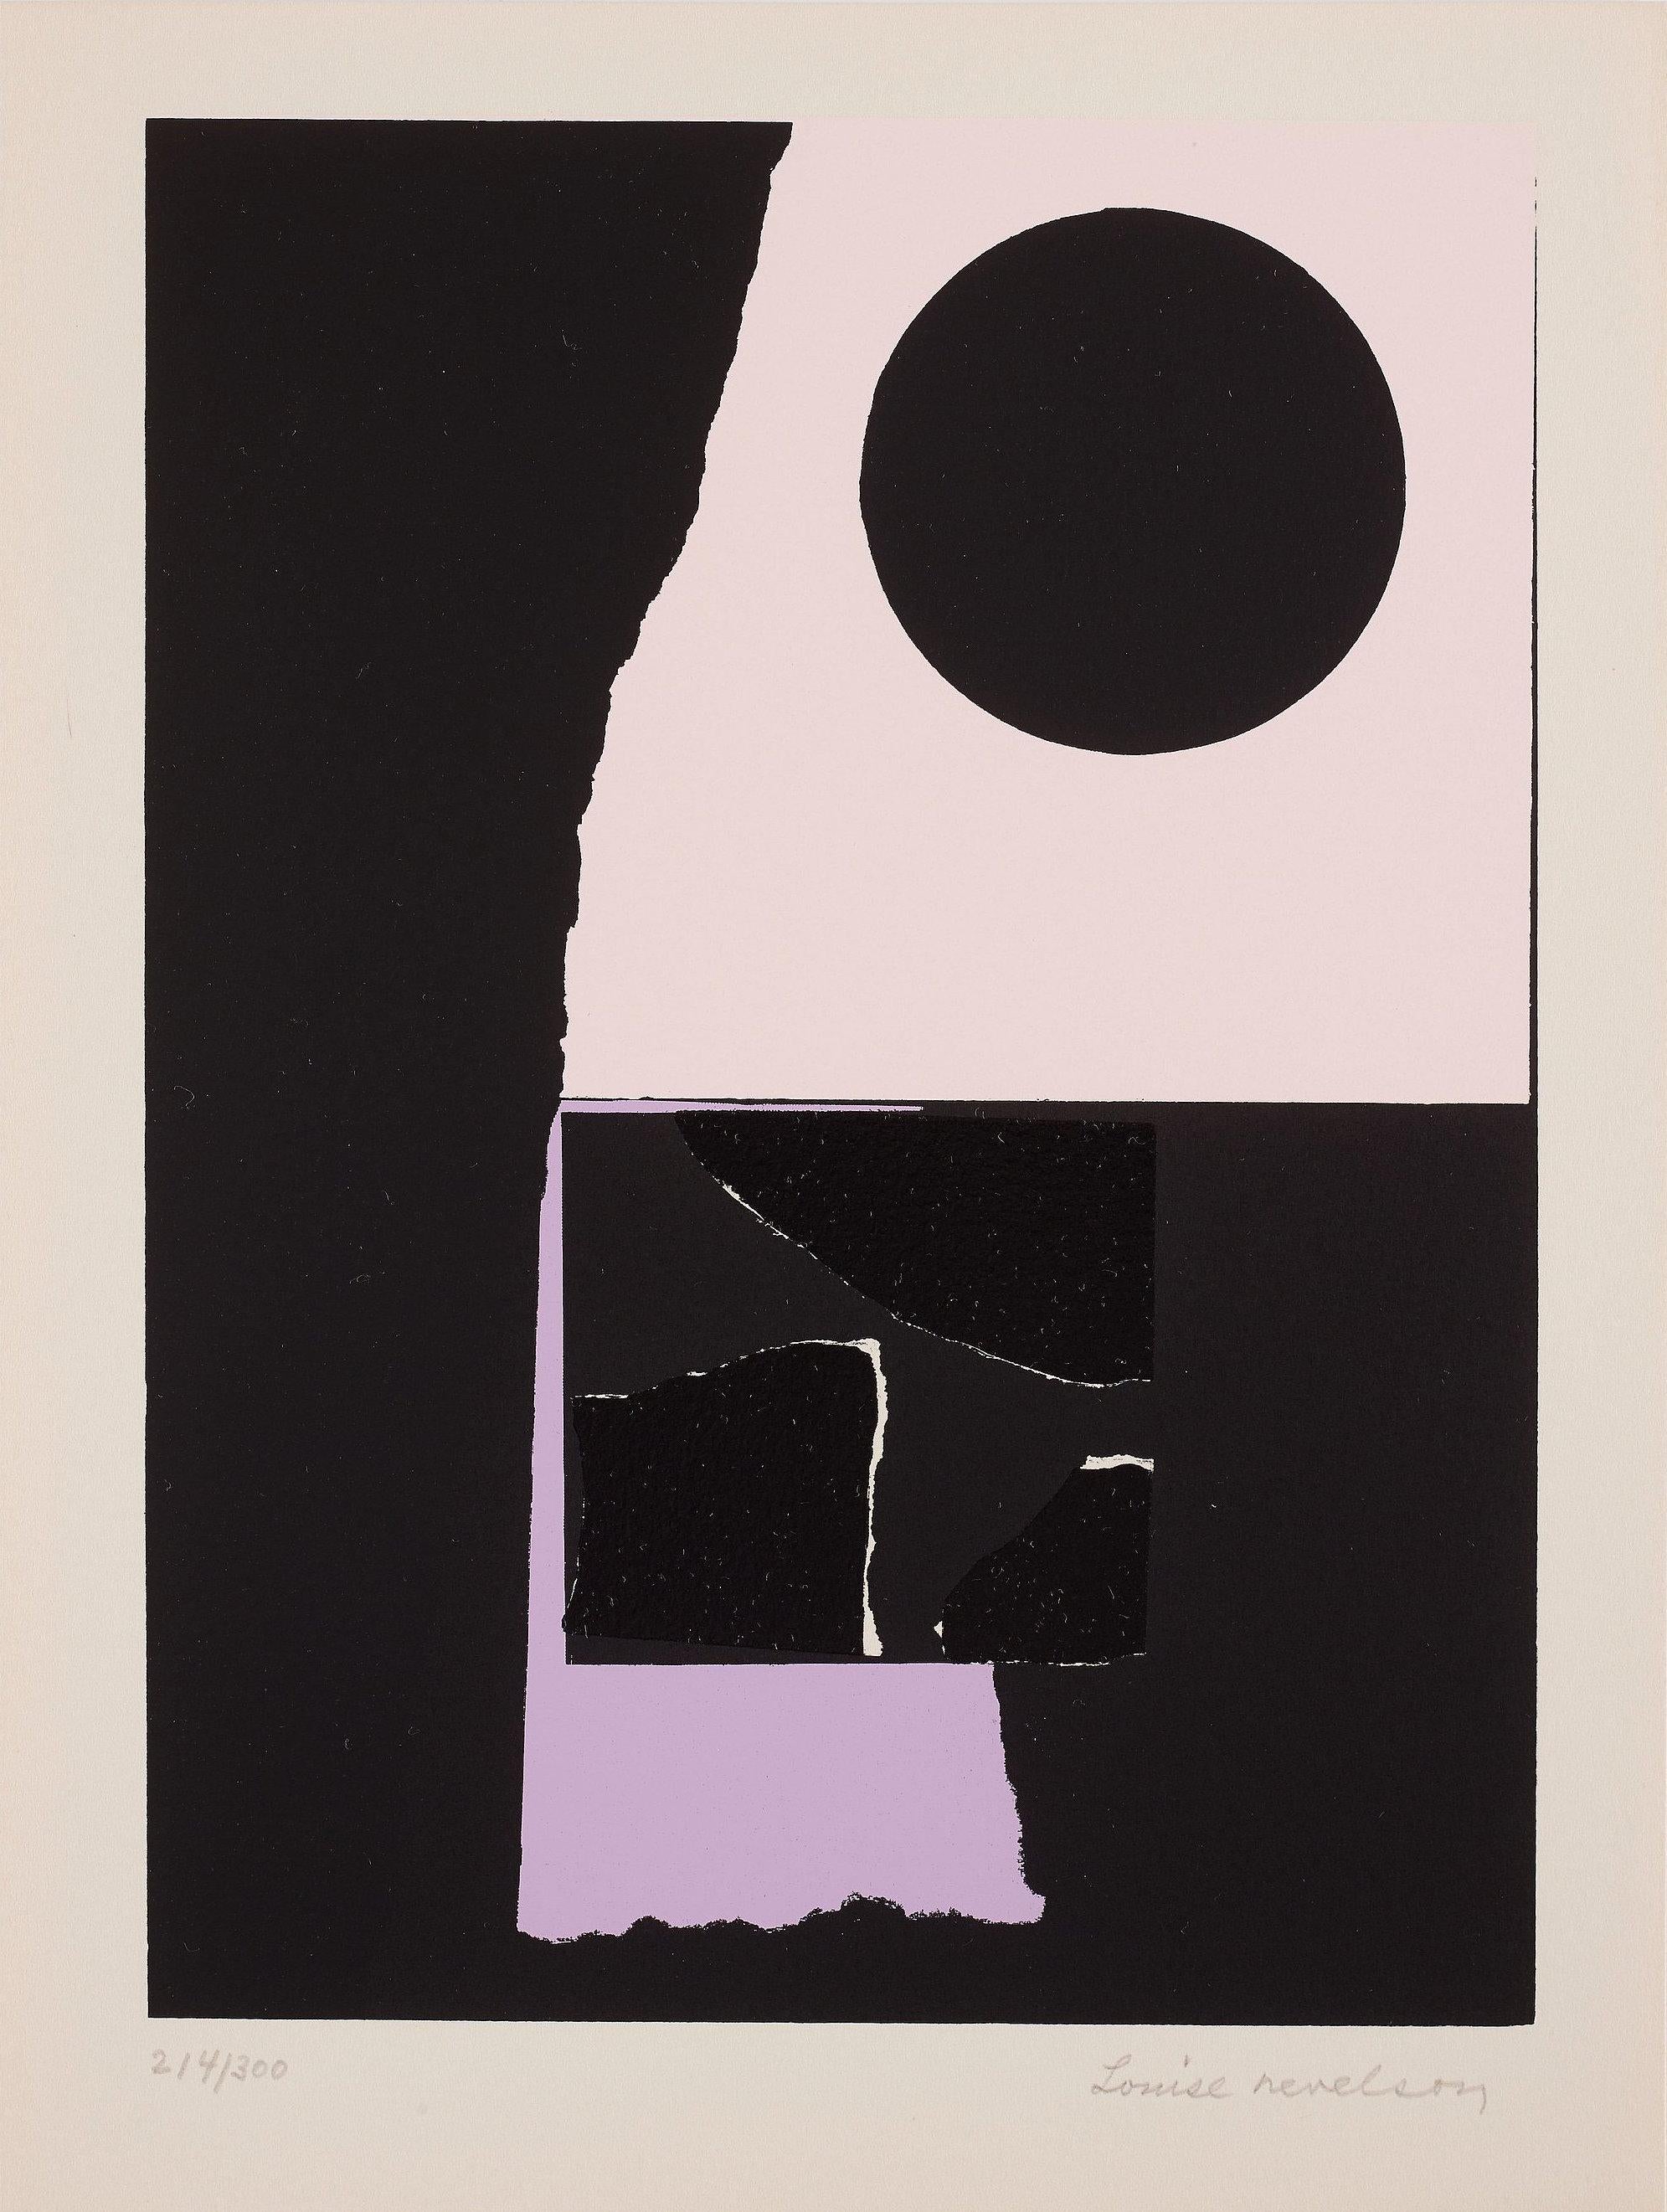 LOUISE NEVELSON
Untitled, 1973

Screenprint with varnish additions, on rag paper
Signed and numbered from the edition of 300
With the artist's copyright inkstamp verso
From The New York Collection for Stockholm
Printed by Styria Studio Inc., New